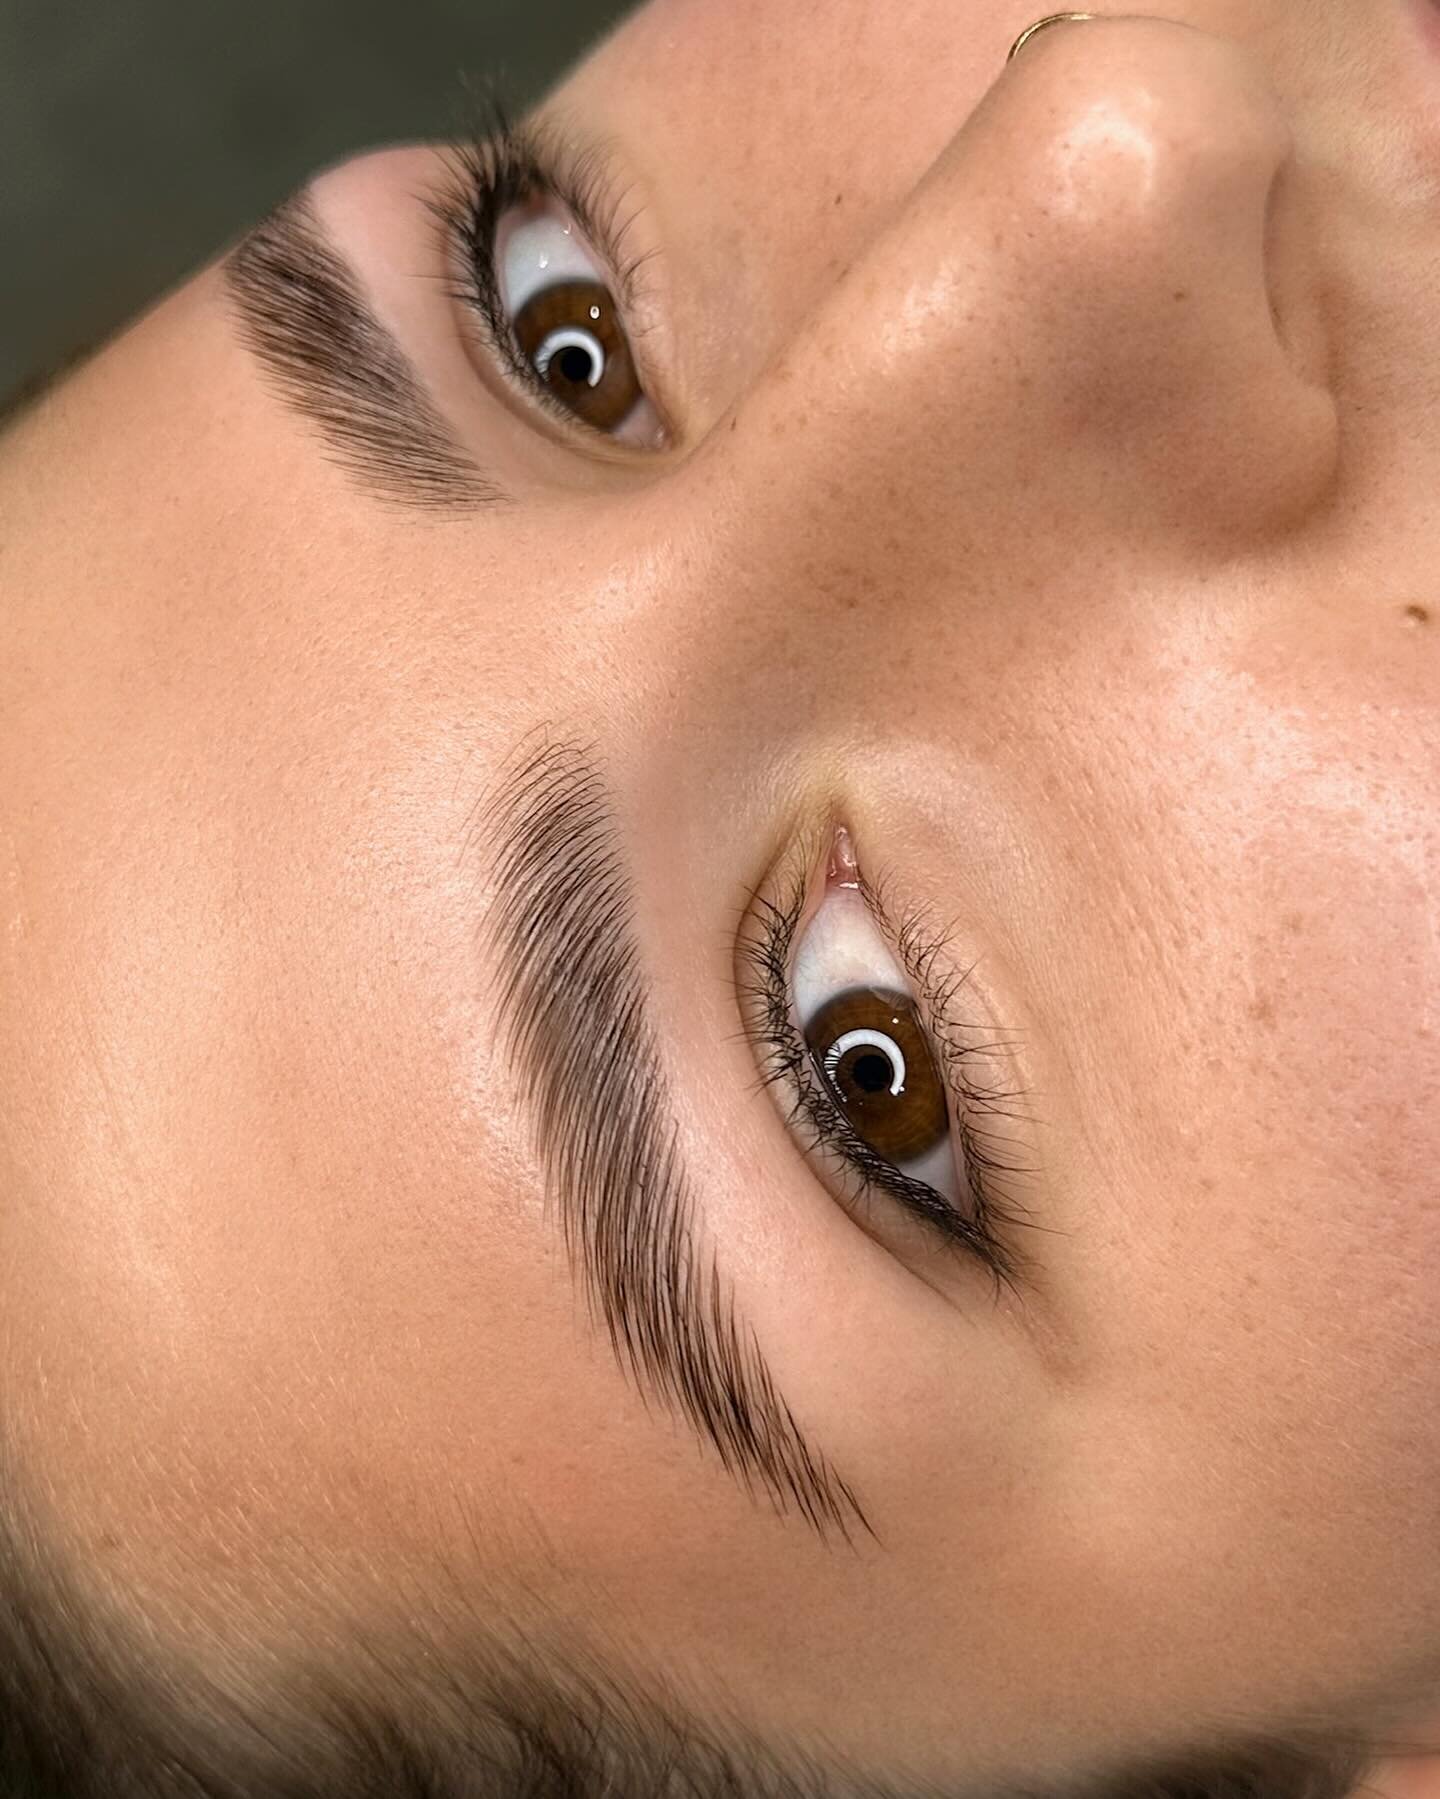 Brow lamination and waxing for brows that speak volumes. 🌟

#browmapping #browsfordays #contentideas #browartist #wowbrow #browboss #browpaste #browmasterclass #browartistry #browshaping #browwaxing #brisbanebeautysalon #brisbanebrows #browhacks #ey